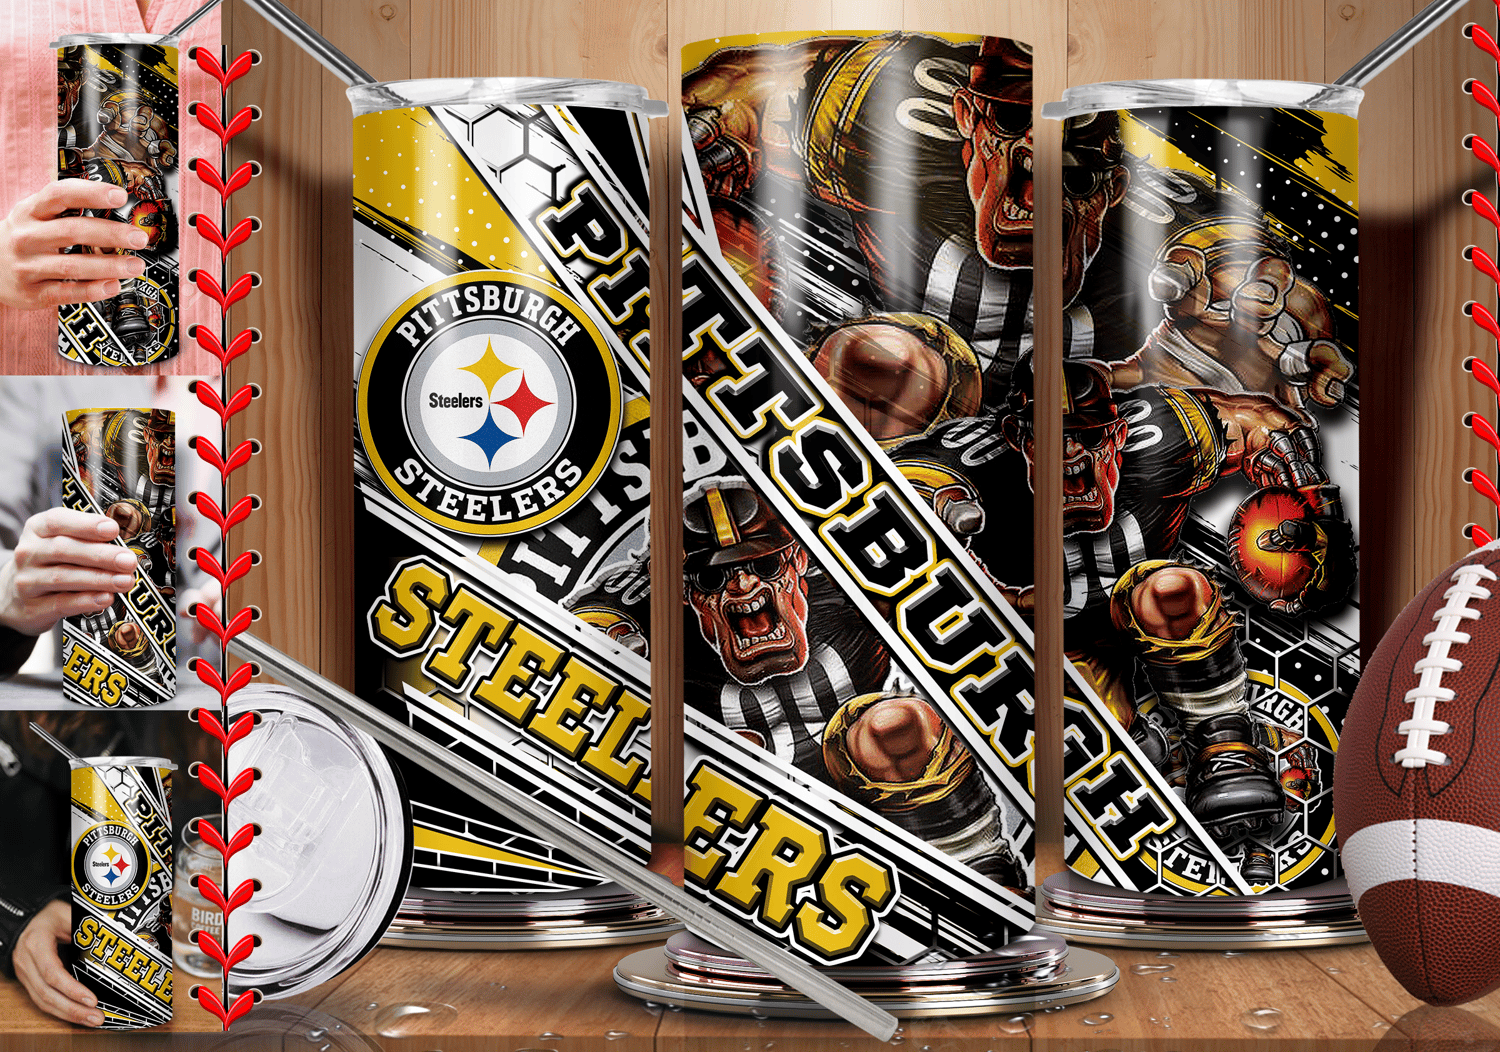 20oz Stainless Steel Straight (Pittsburgh Steelers) - Payhip